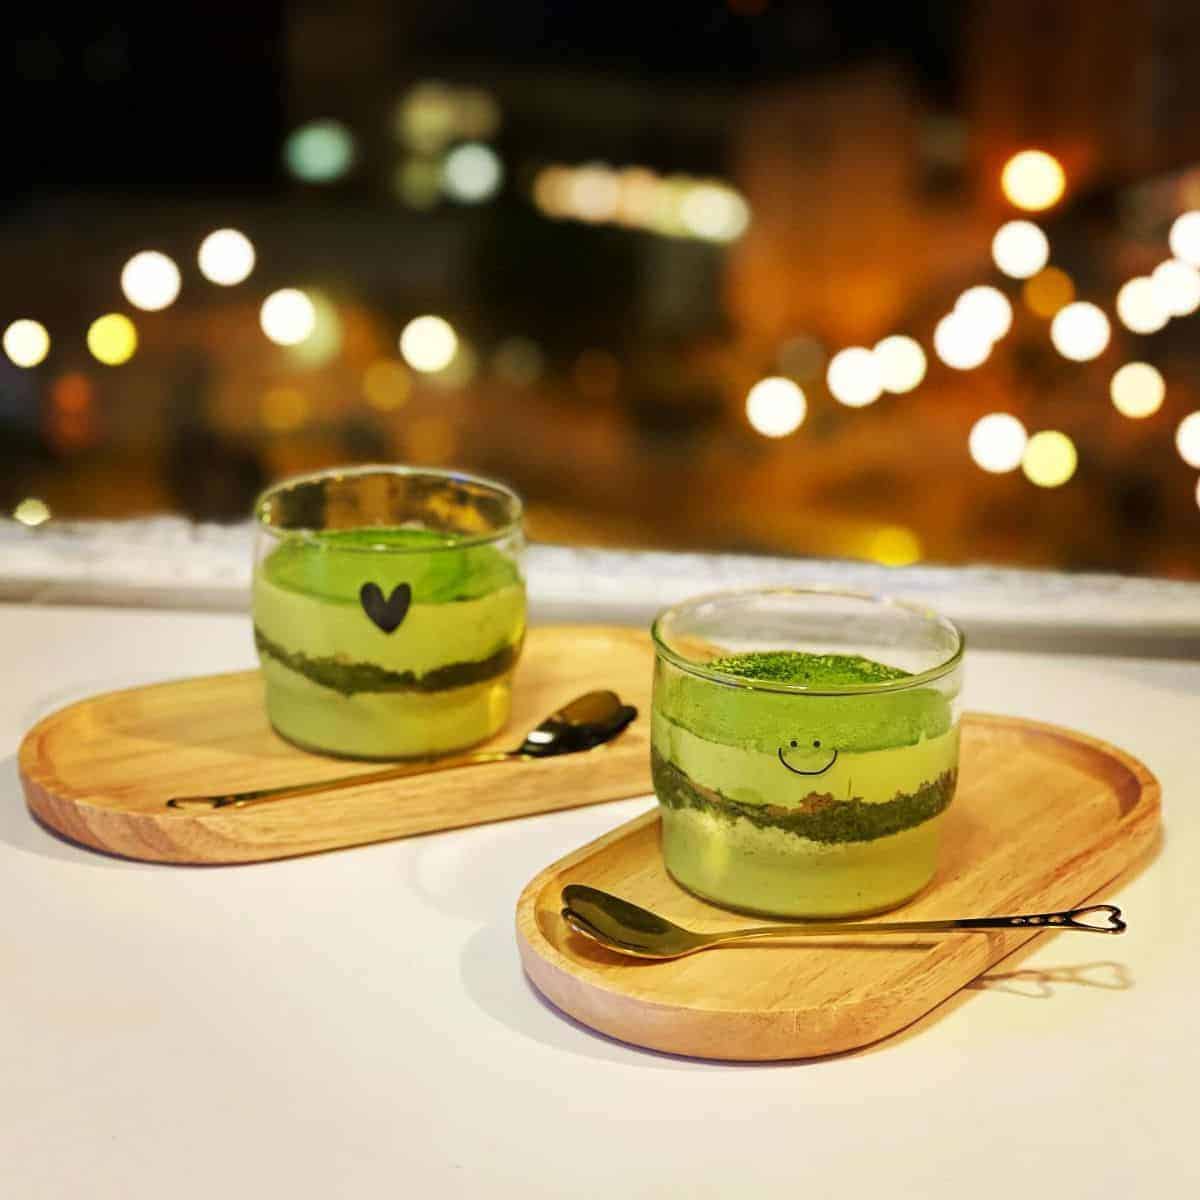 Two glasses of green tea Italian dessert with a heart shape spoon on the side